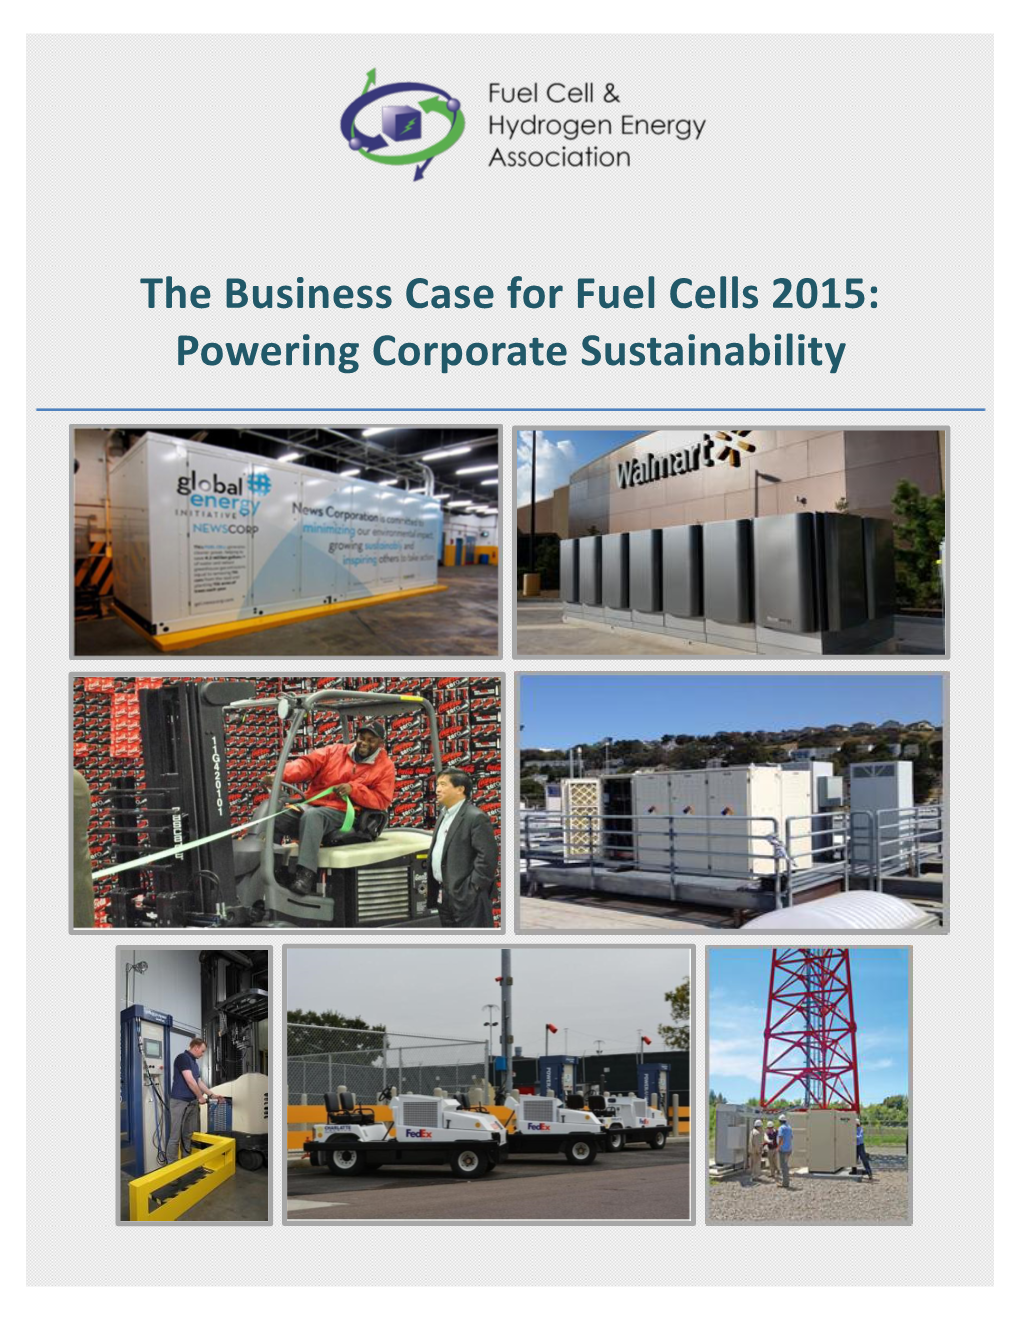 The Business Case for Fuel Cells 2015: Powering Corporate Sustainability